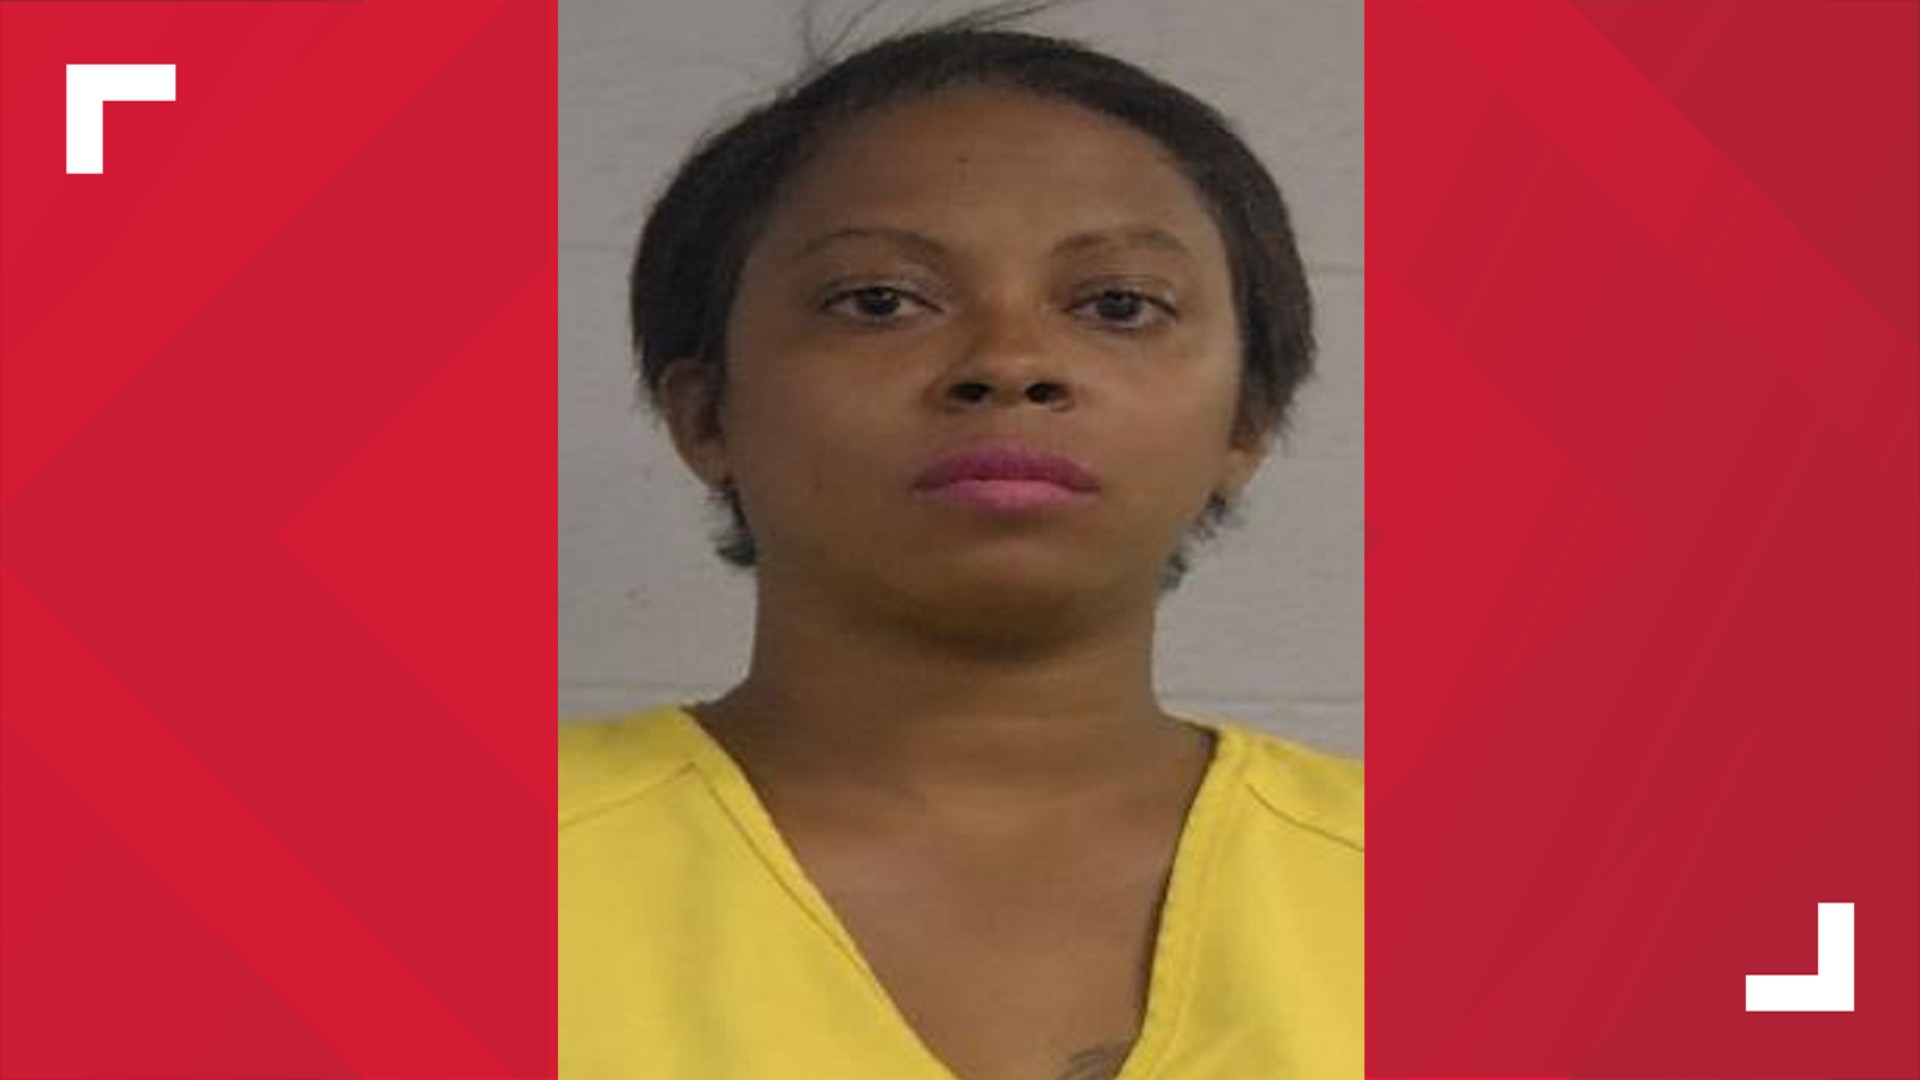 A murder warrant is out for 37-year-old Dejuane Ludie Anderson of Atlanta, who is the mother's child.